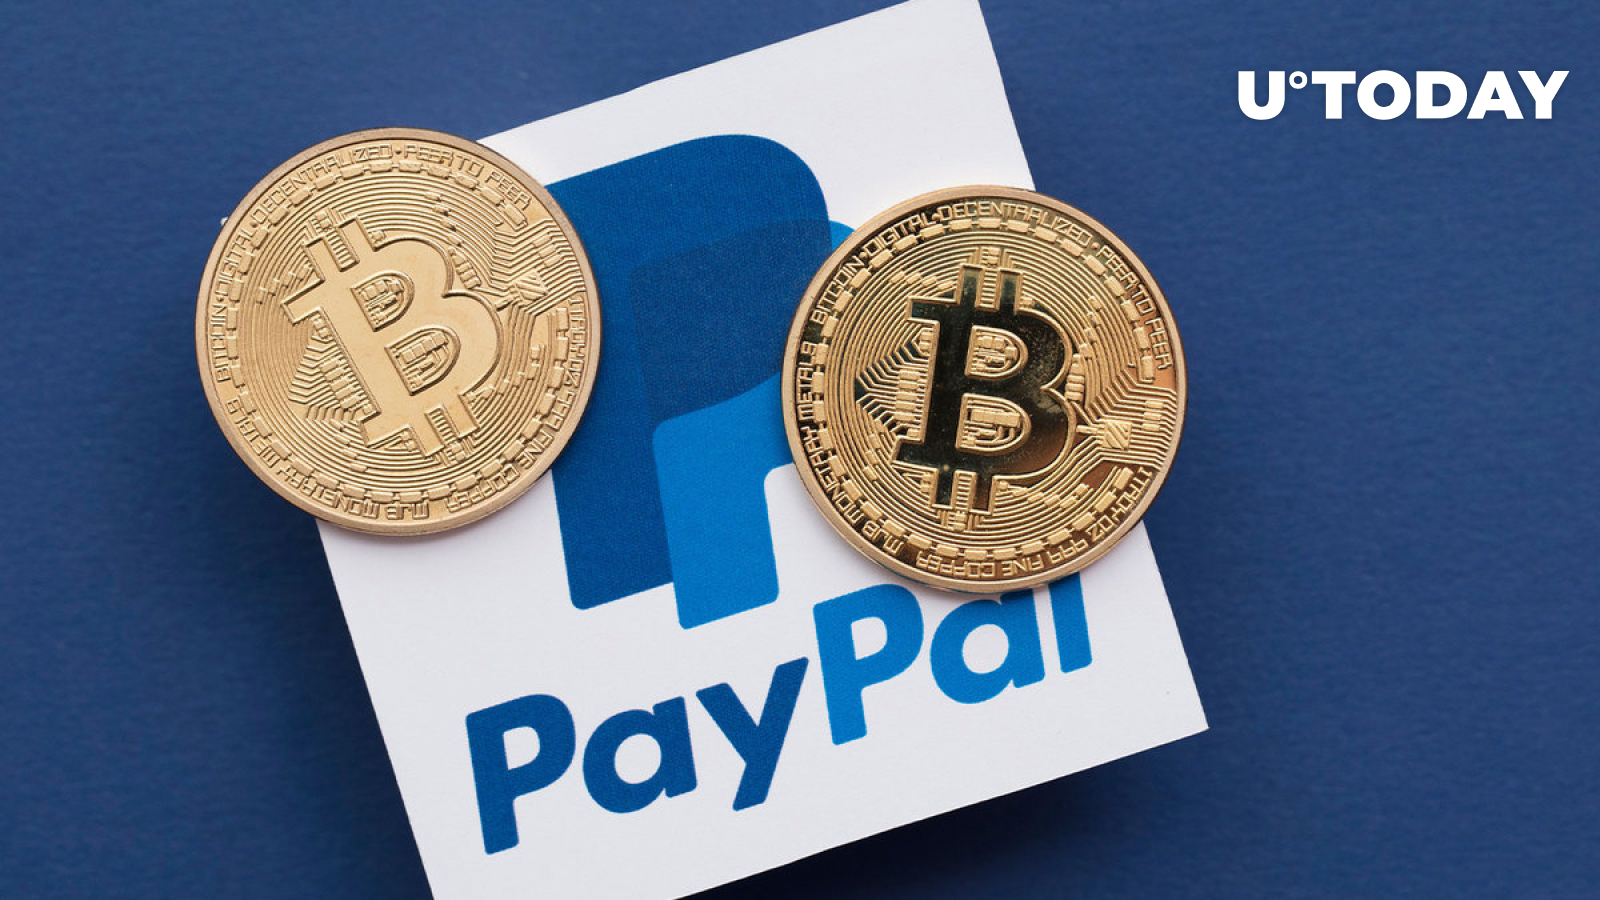 PayPal Offers Big Potential for Buying Bitcoin, John Lennon’s Son Believes